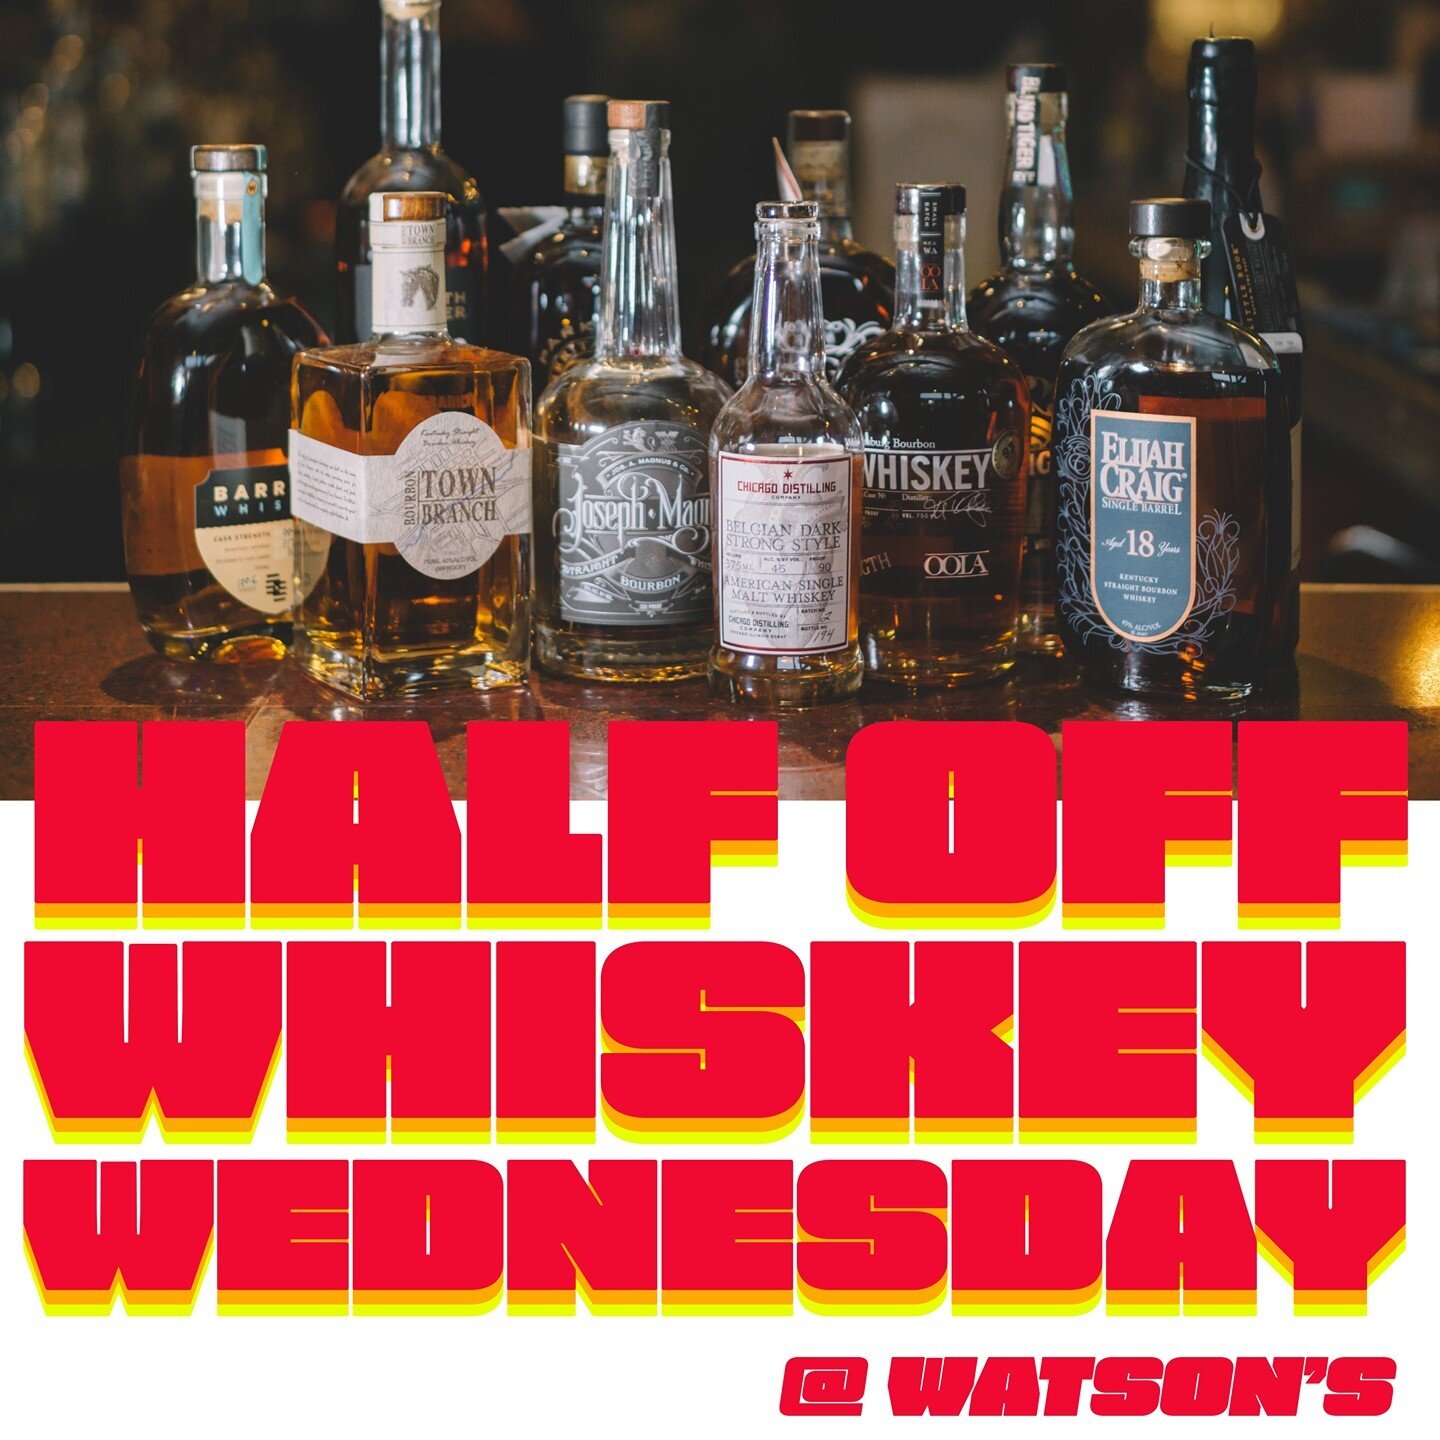 All whiskey, 50% off menu price! Wednesdays only!